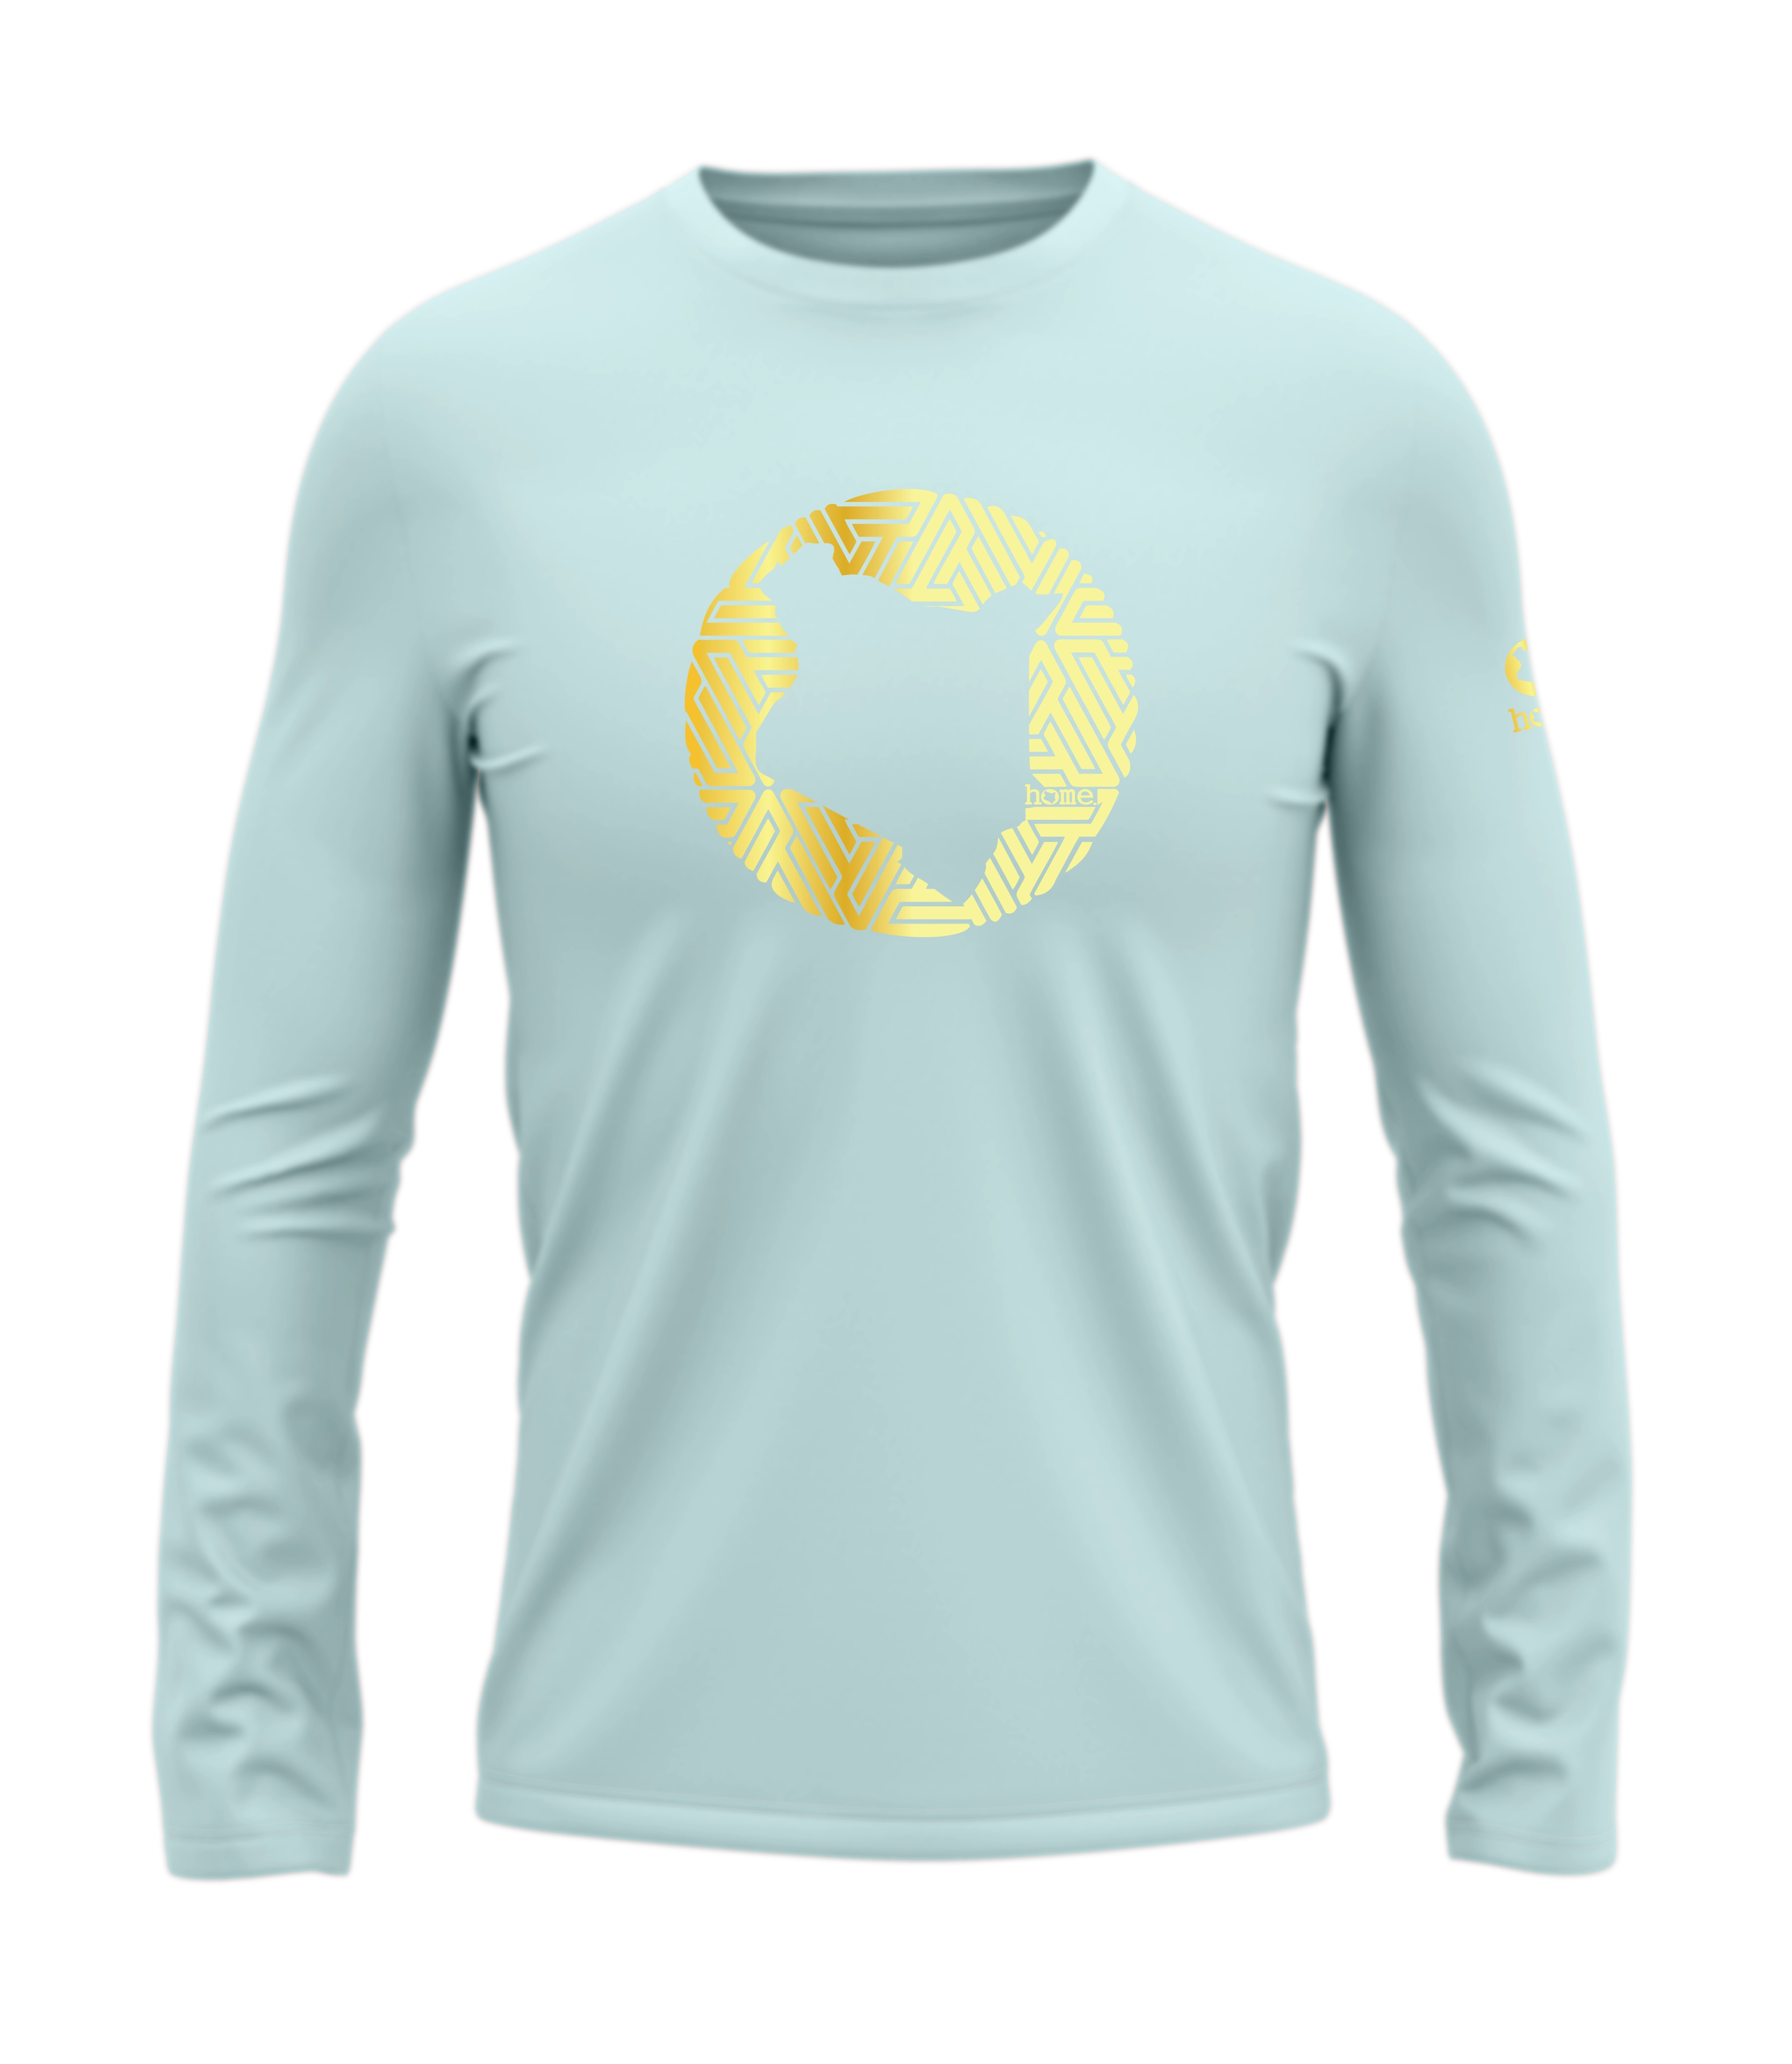 home_254 LONG-SLEEVED MISTY BLUE T-SHIRT WITH A GOLD MAP PRINT – COTTON PLUS FABRIC